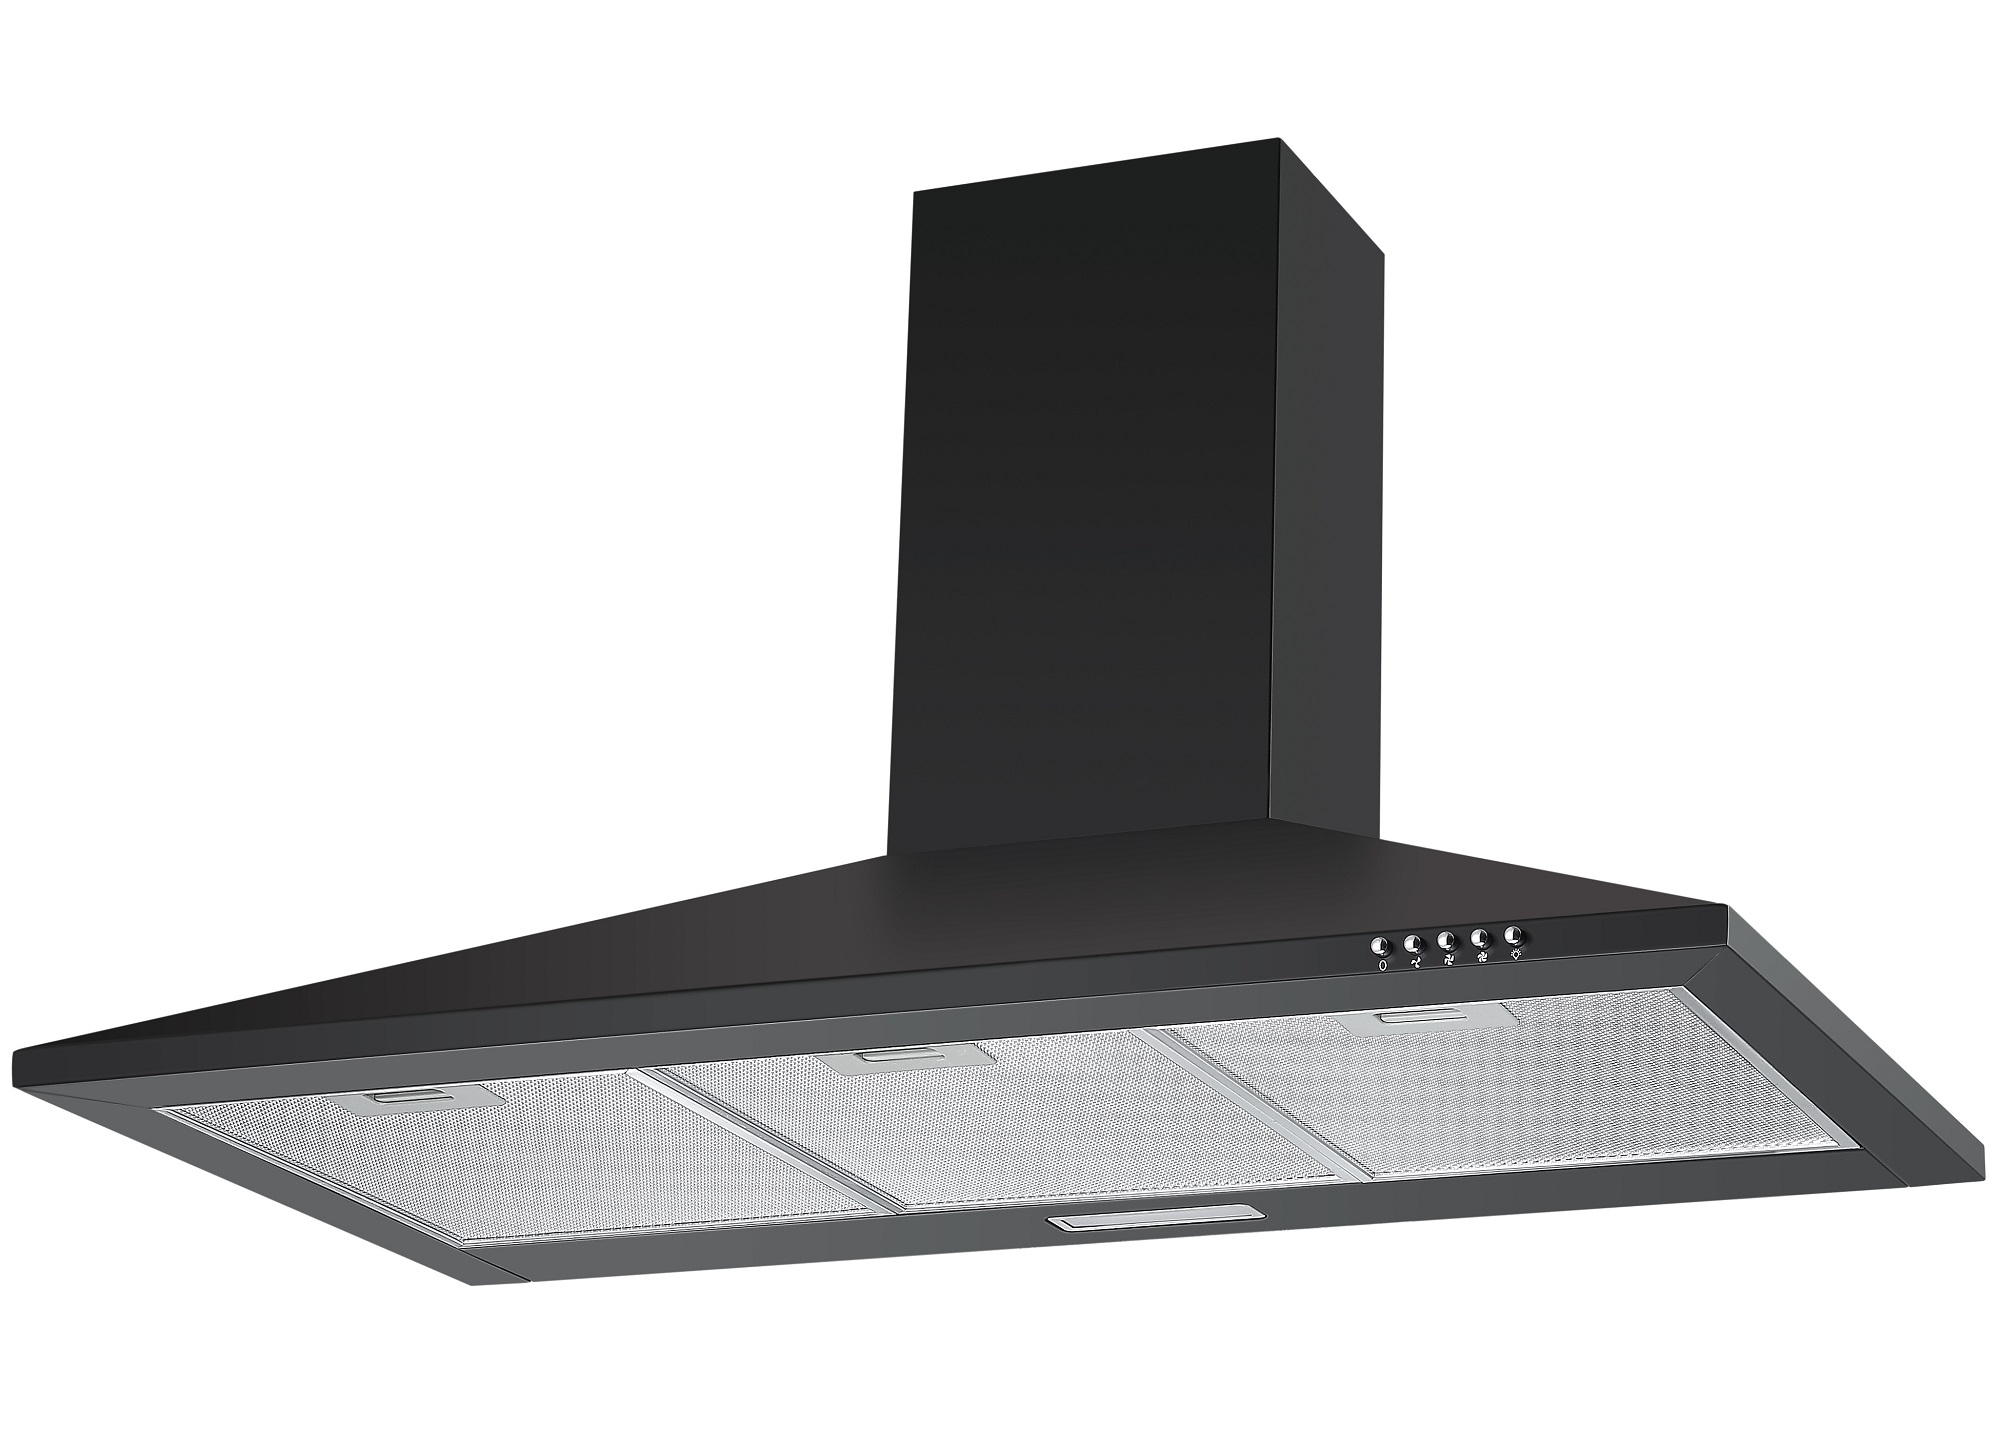 Details About Cookology Ch900bk Kitchen Extractor Fan 90cm Chimney Cooker Hood In Black throughout dimensions 2000 X 1431